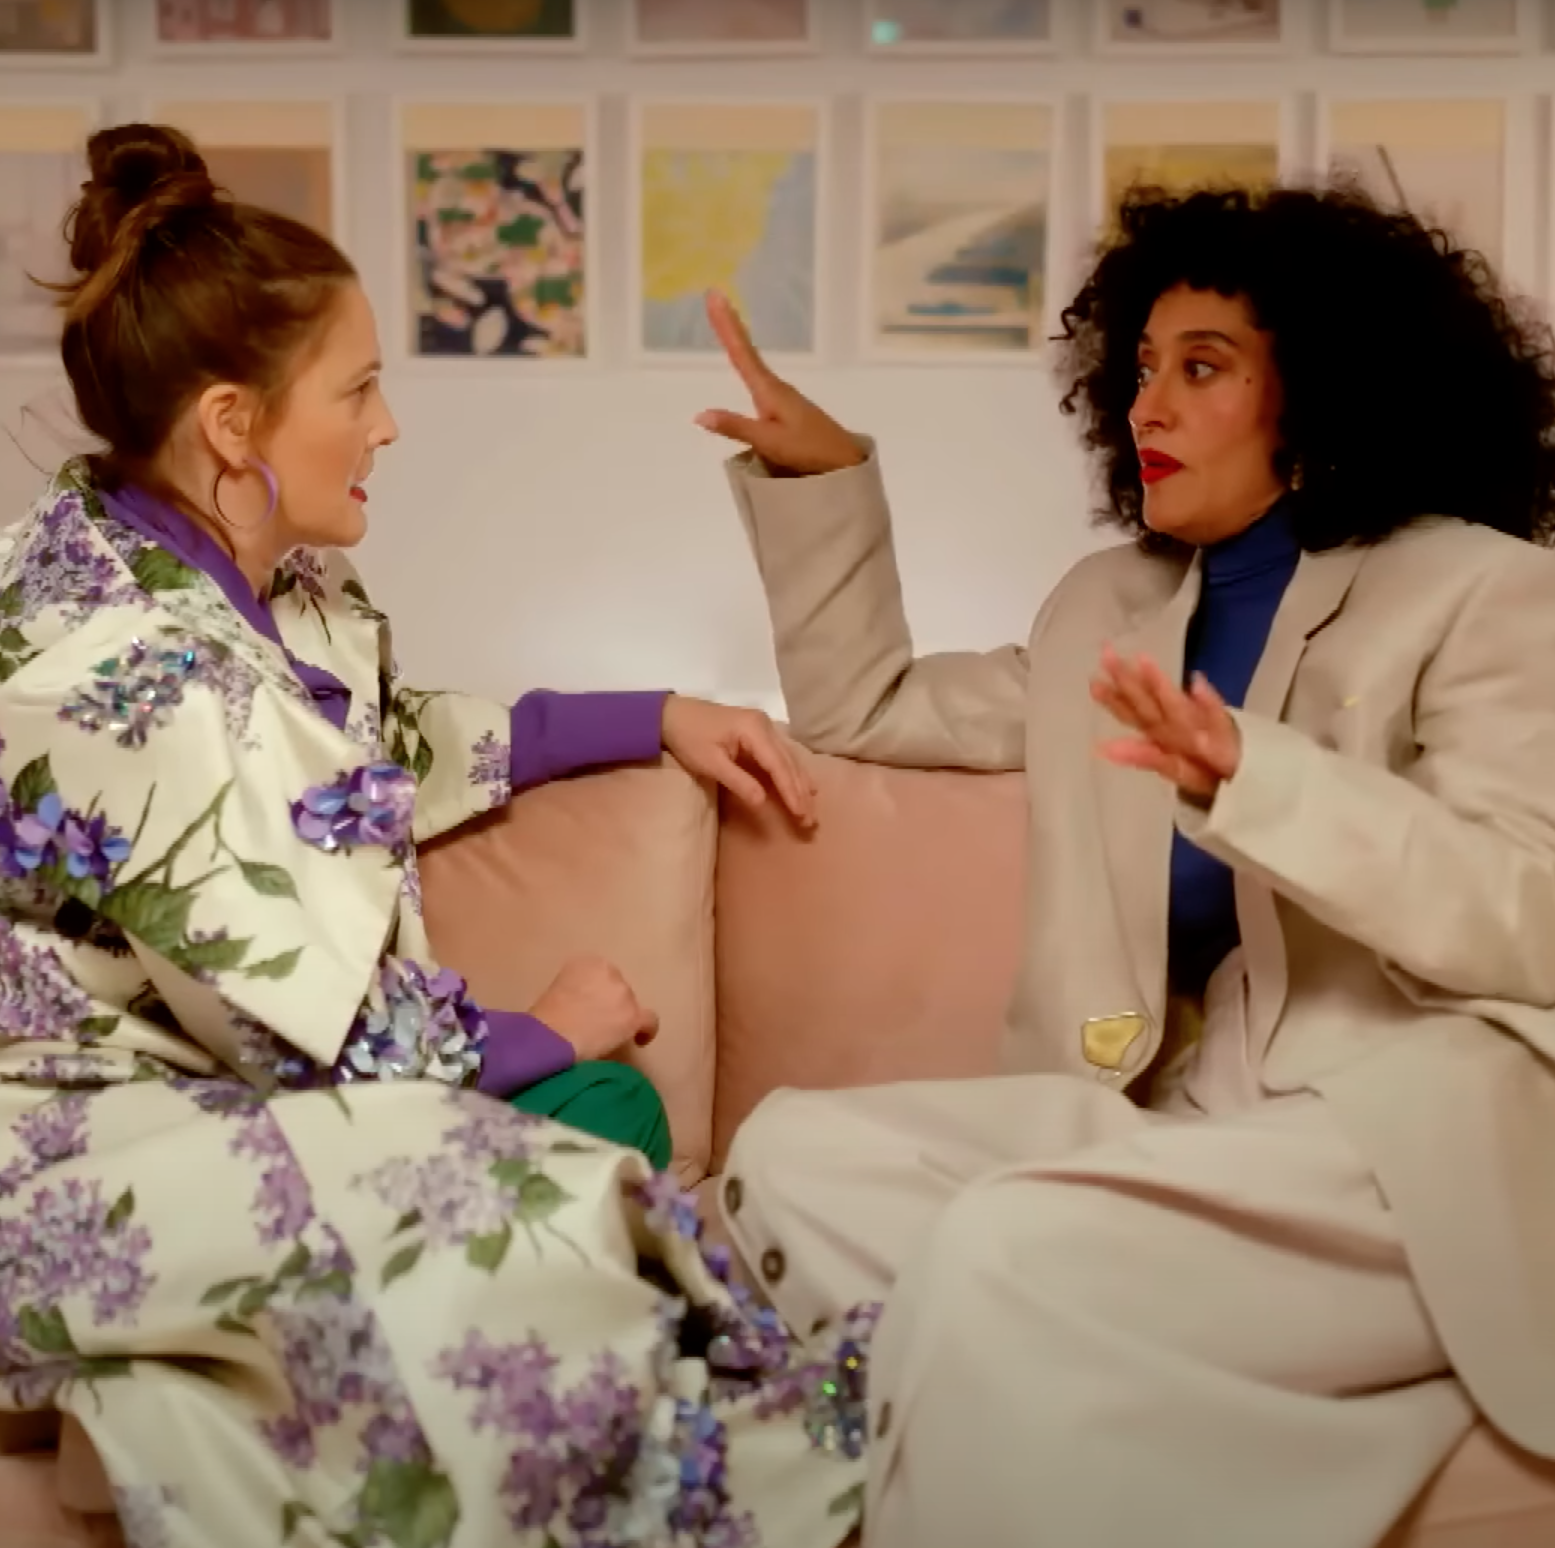 Drew Barrymore and Tracee Ellis Ross Share Their Feelings About Aging